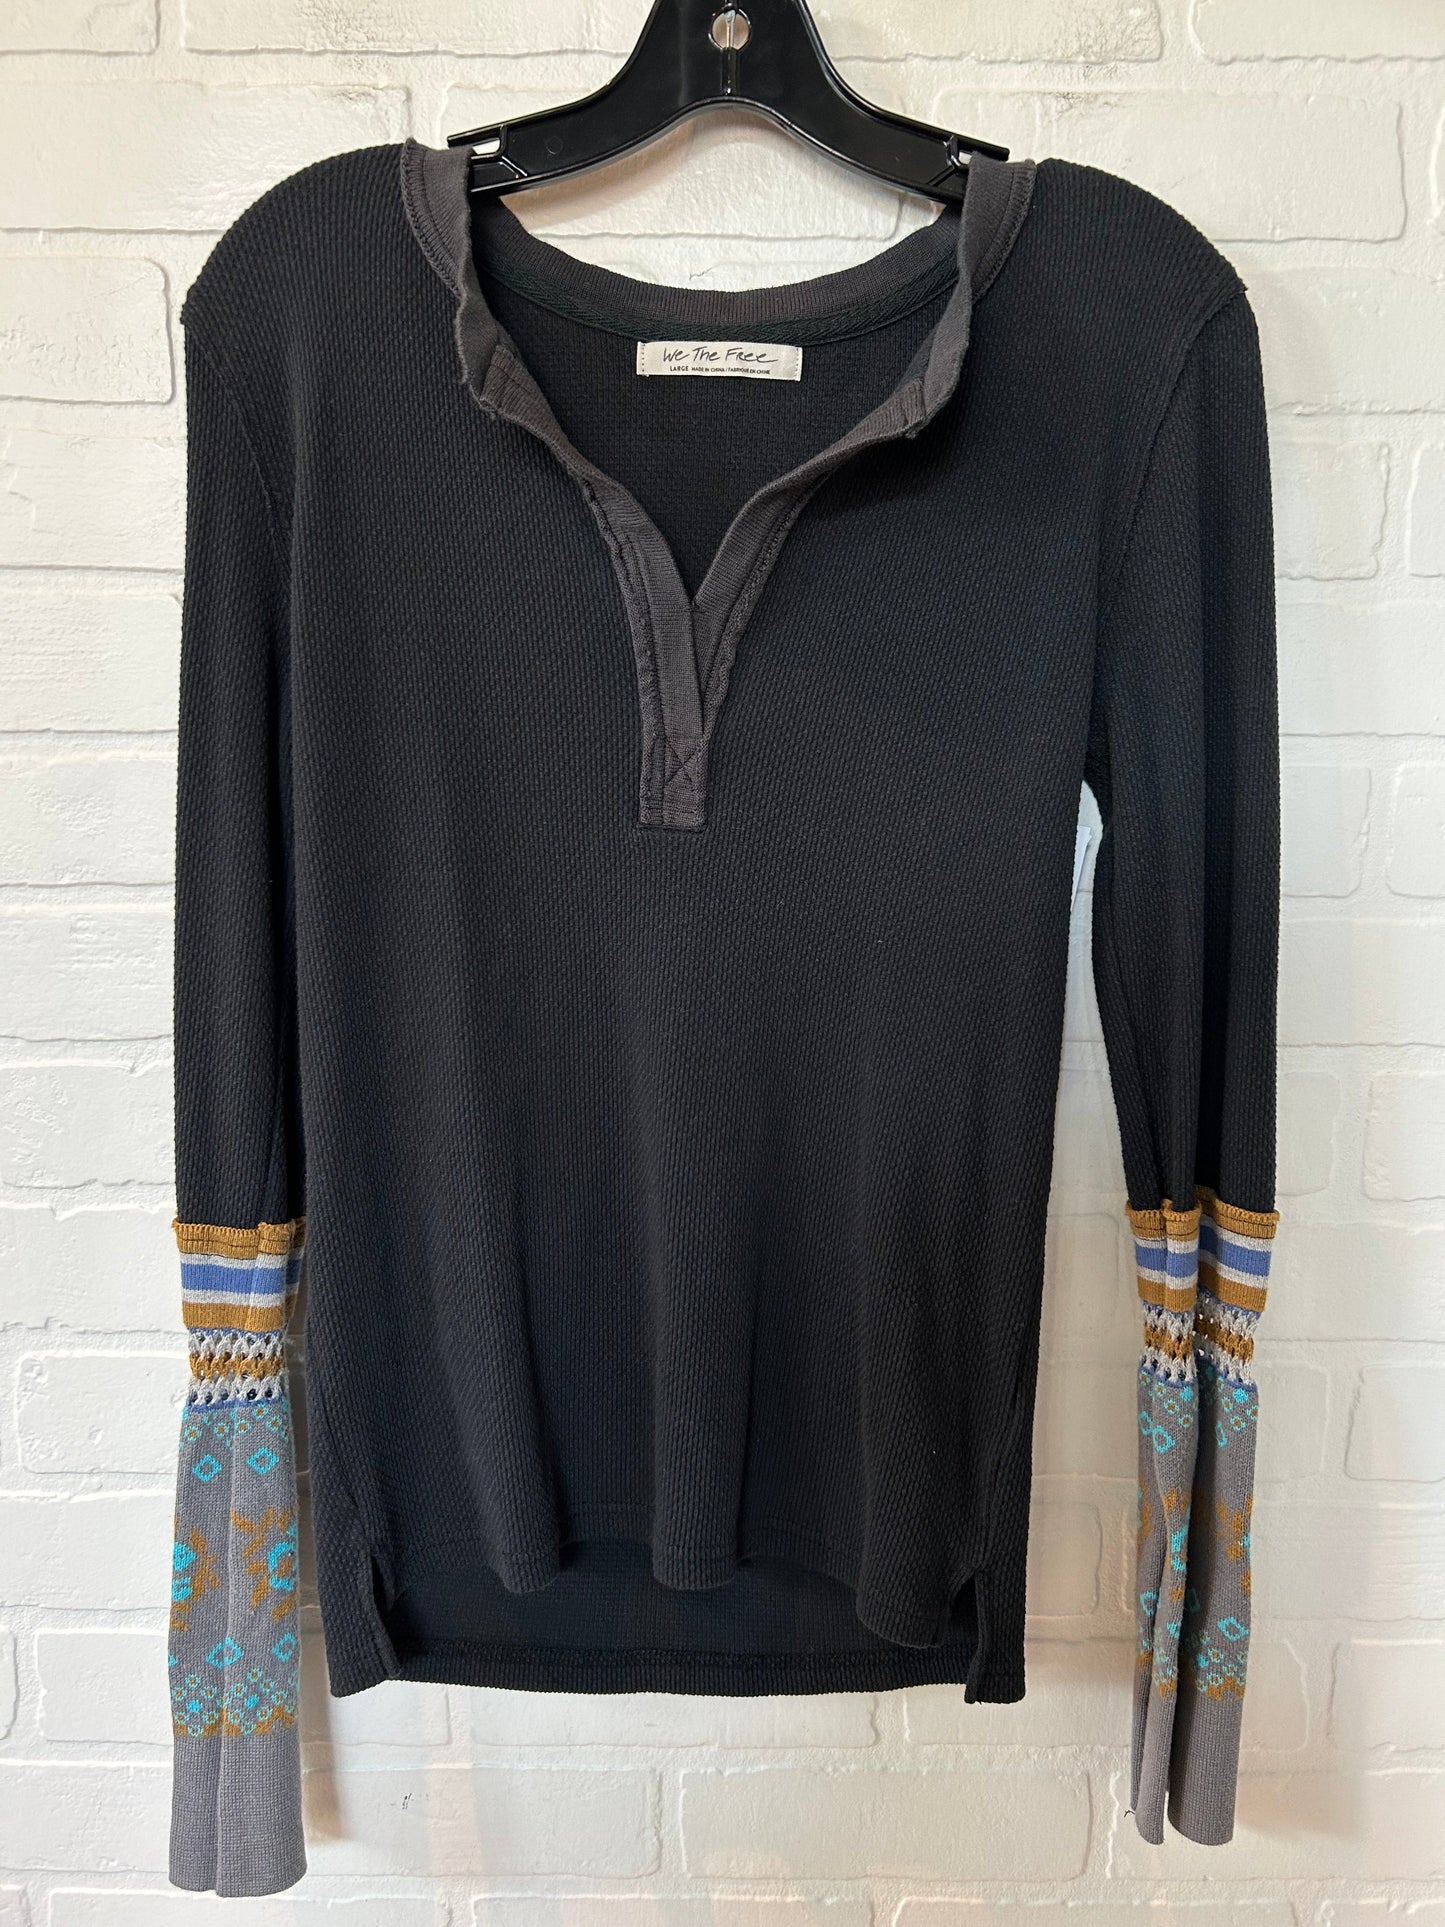 Black Top Long Sleeve We The Free, Size L